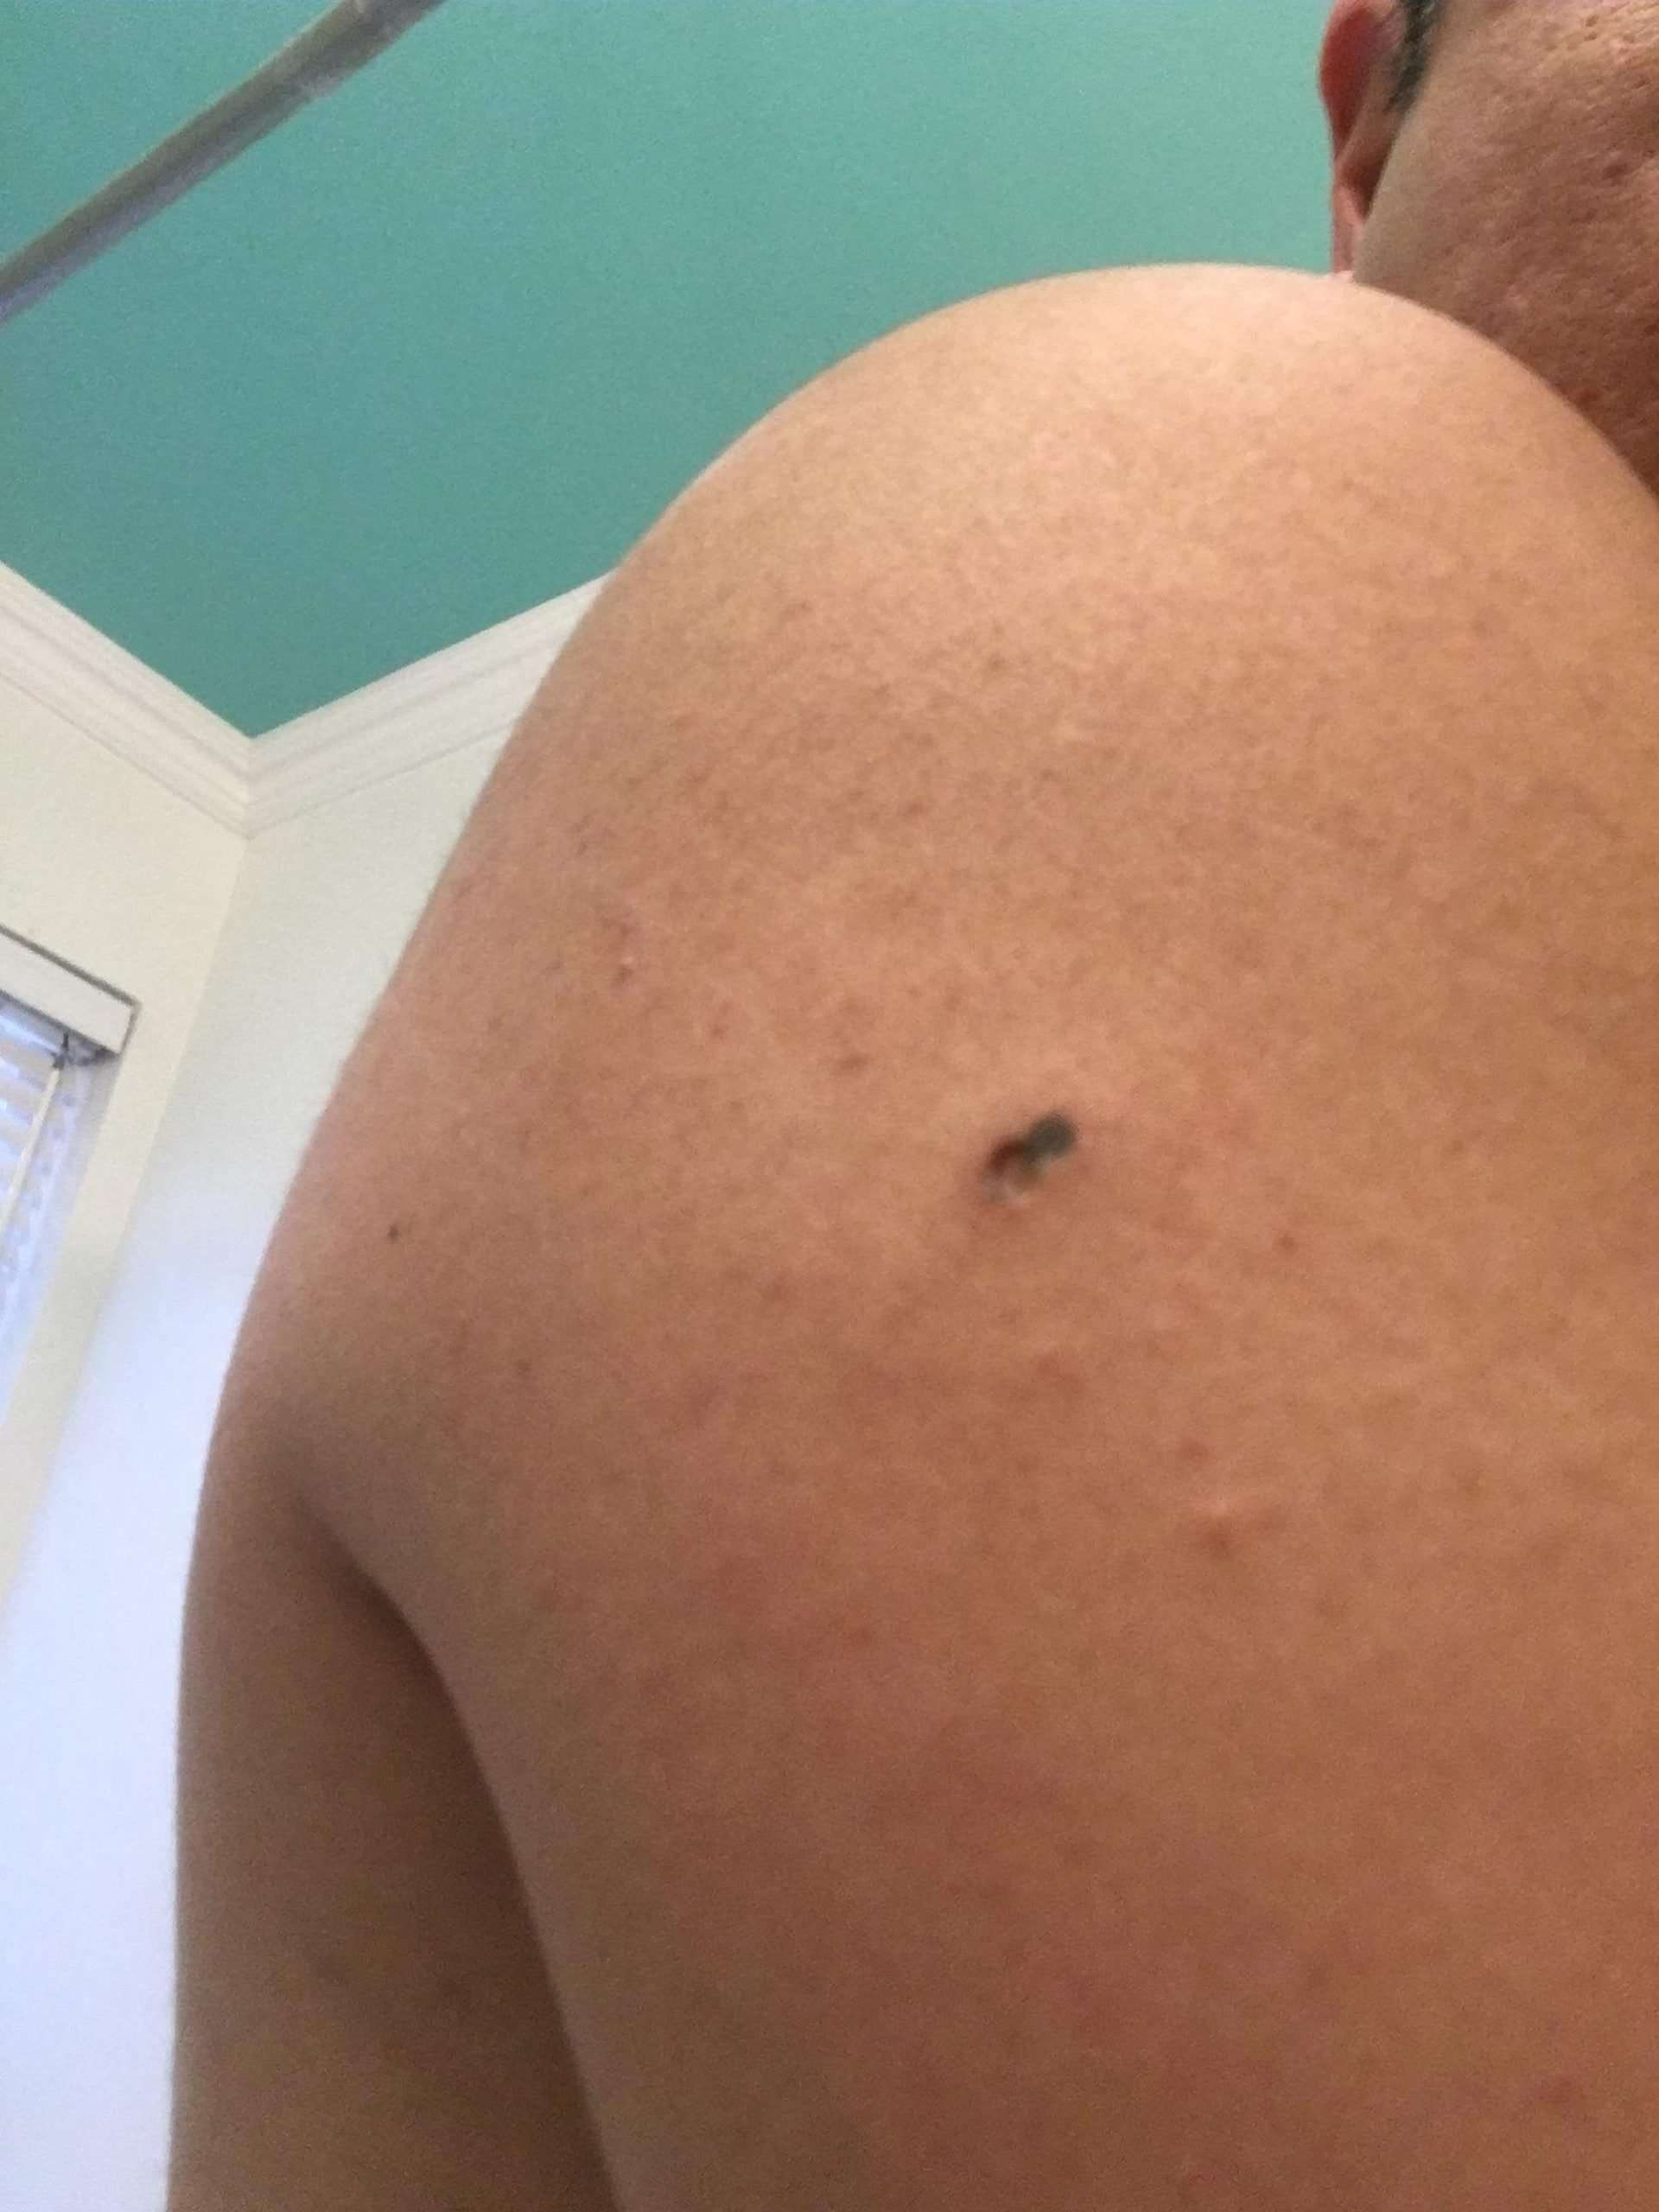 Is this a melanoma? : Dermatology